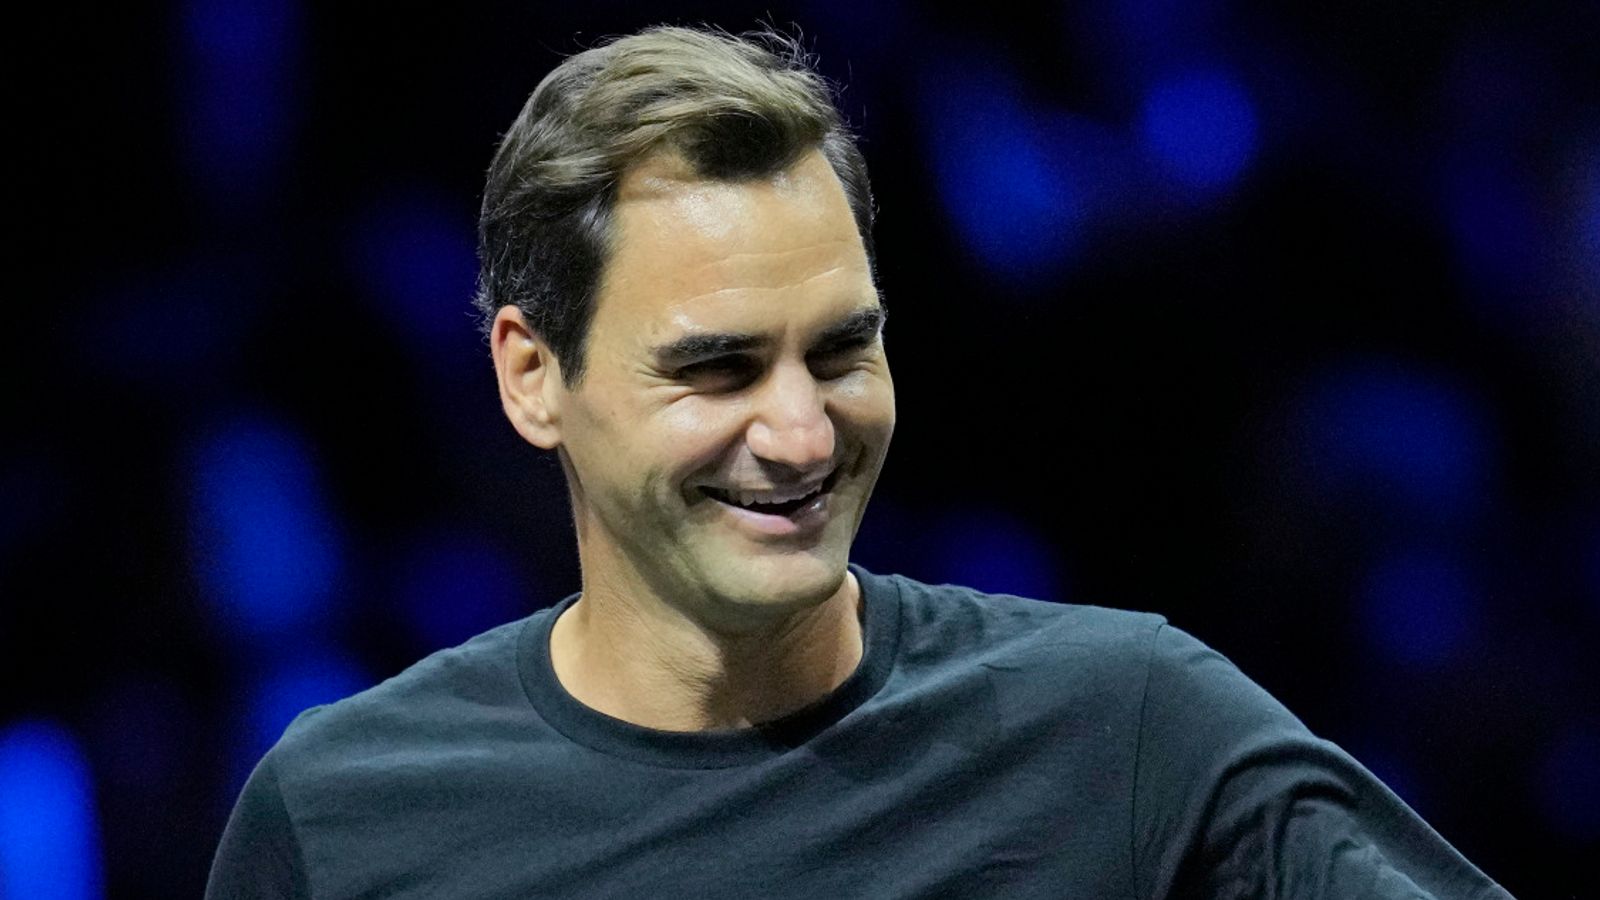 Roger Federer prepares for his last ever competitive match – what he did for tennis is unrivaled |  Jacquie Beltrao |  UK News